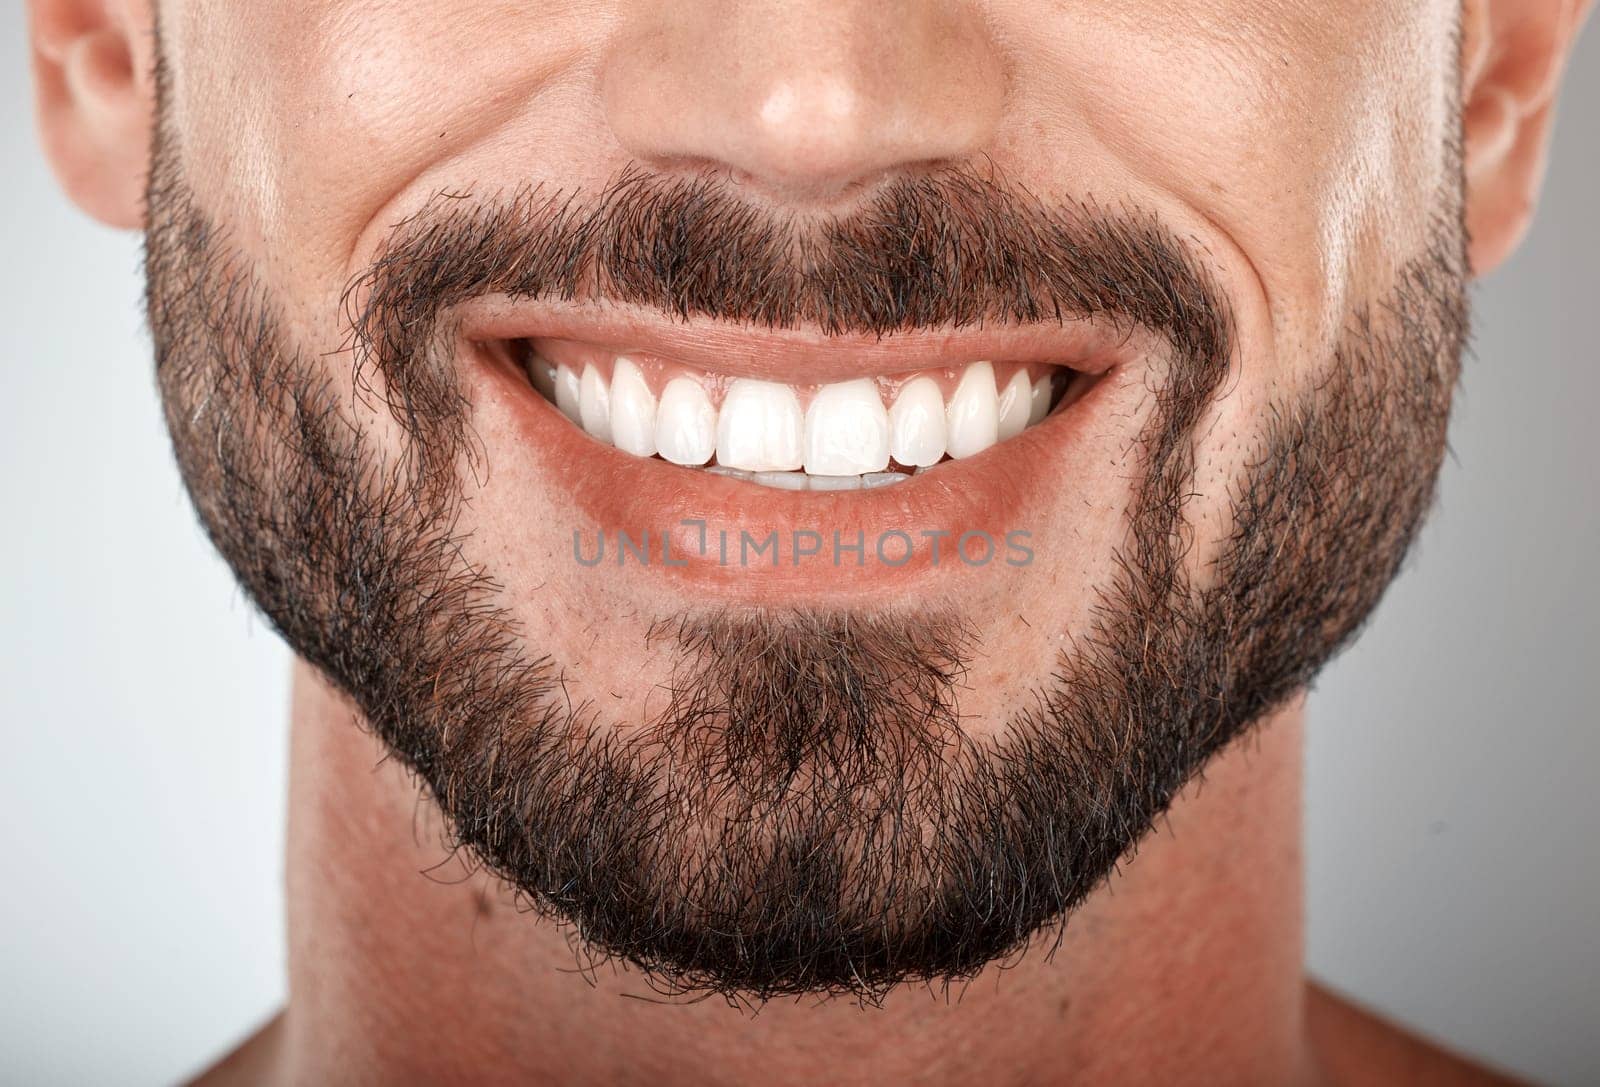 Smile, mouth and teeth whitening of man on studio background of wellness. Closeup male model face with clean dental, fresh breath and happy tooth implant, aesthetic beauty or healthy cosmetic results.